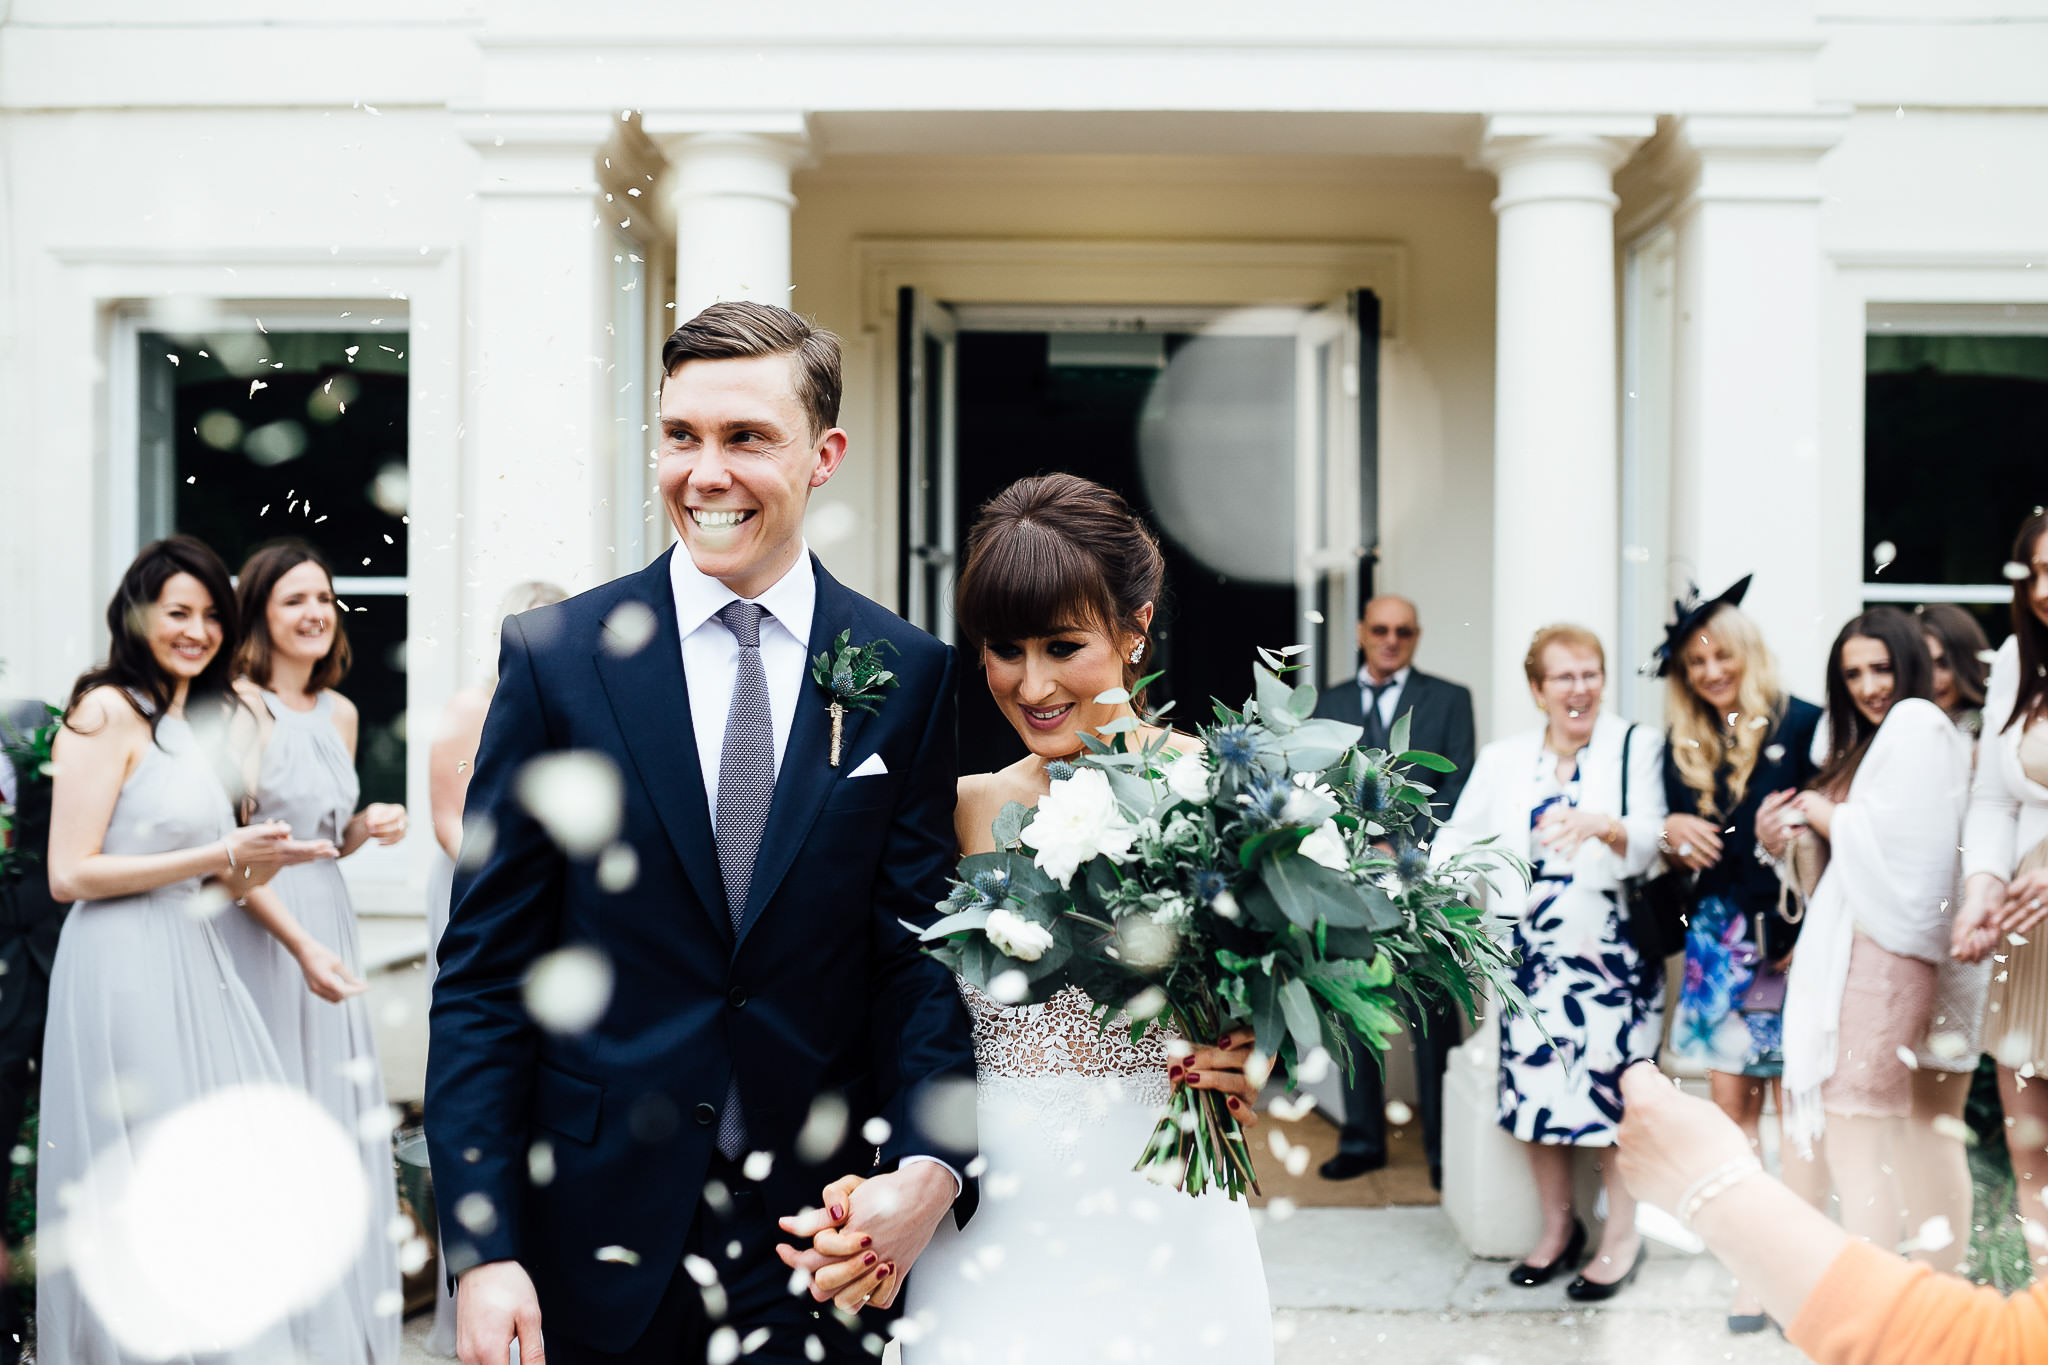 ceremony at morden hall wedding botanical theme with geometrical copper details